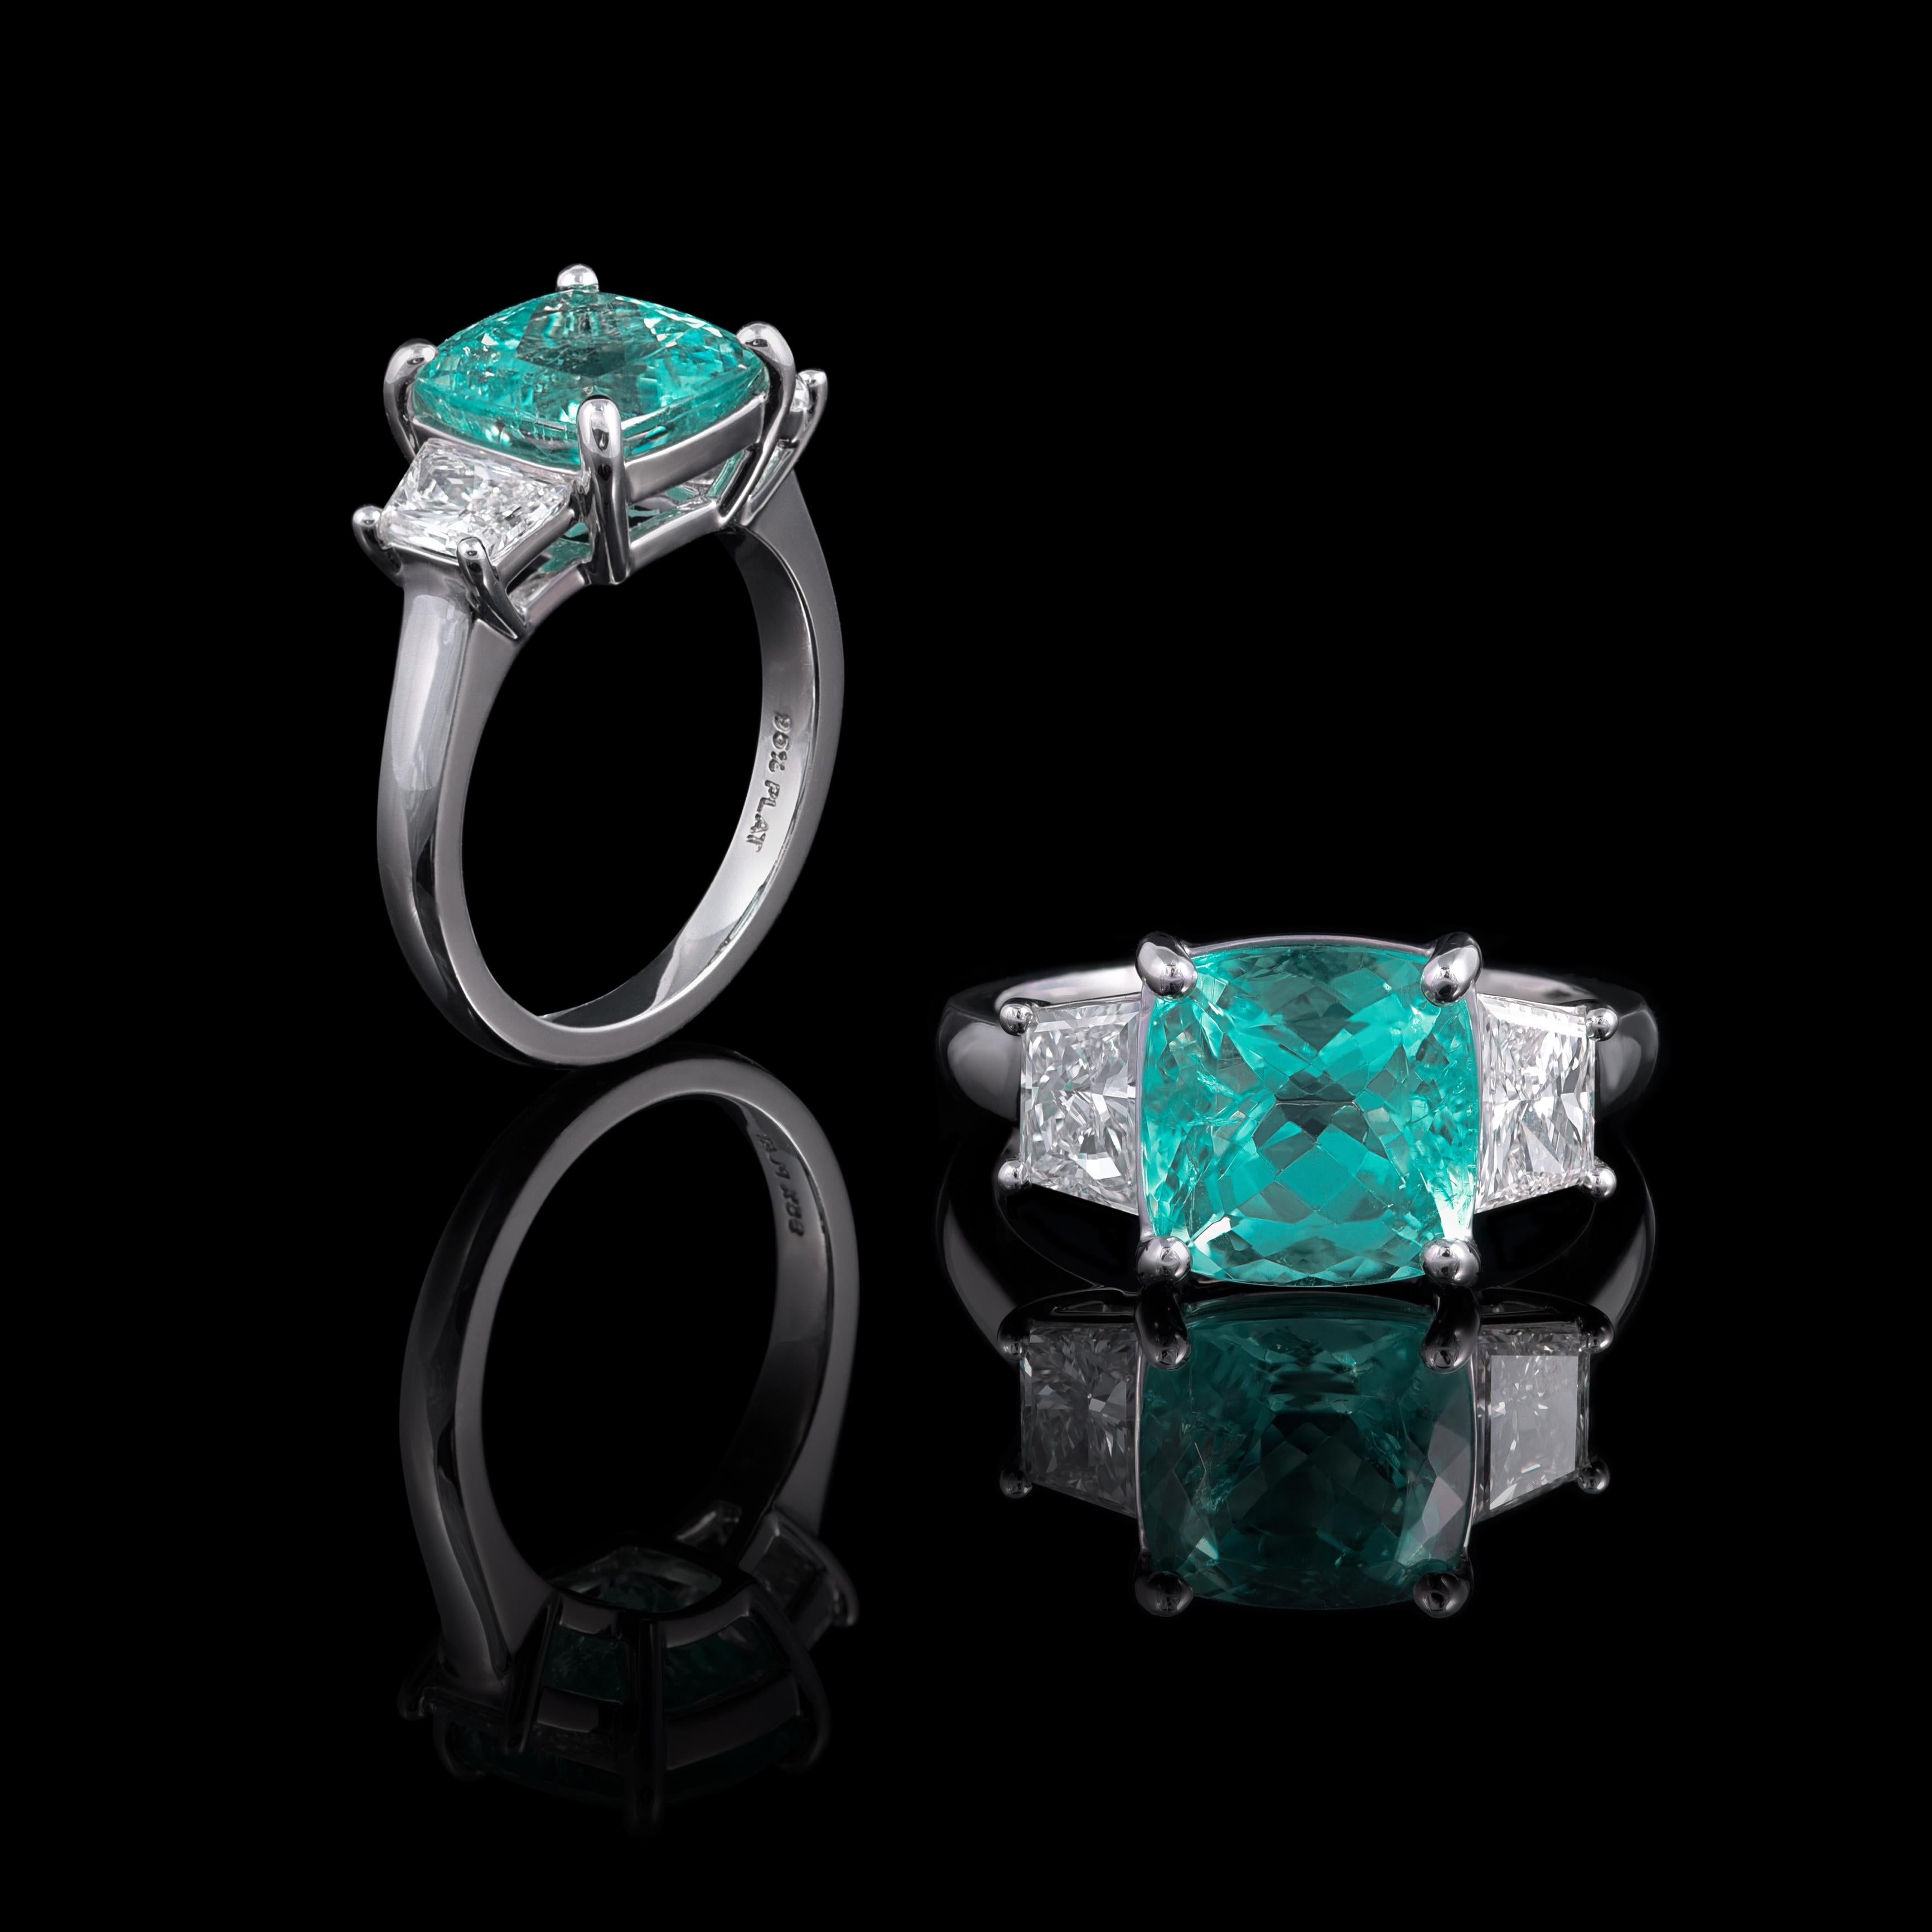 GIA Certified 4.21ct Natural Mozambique Paraiba Tourmaline Diamond Platinum Ring In New Condition For Sale In Los Angeles, CA